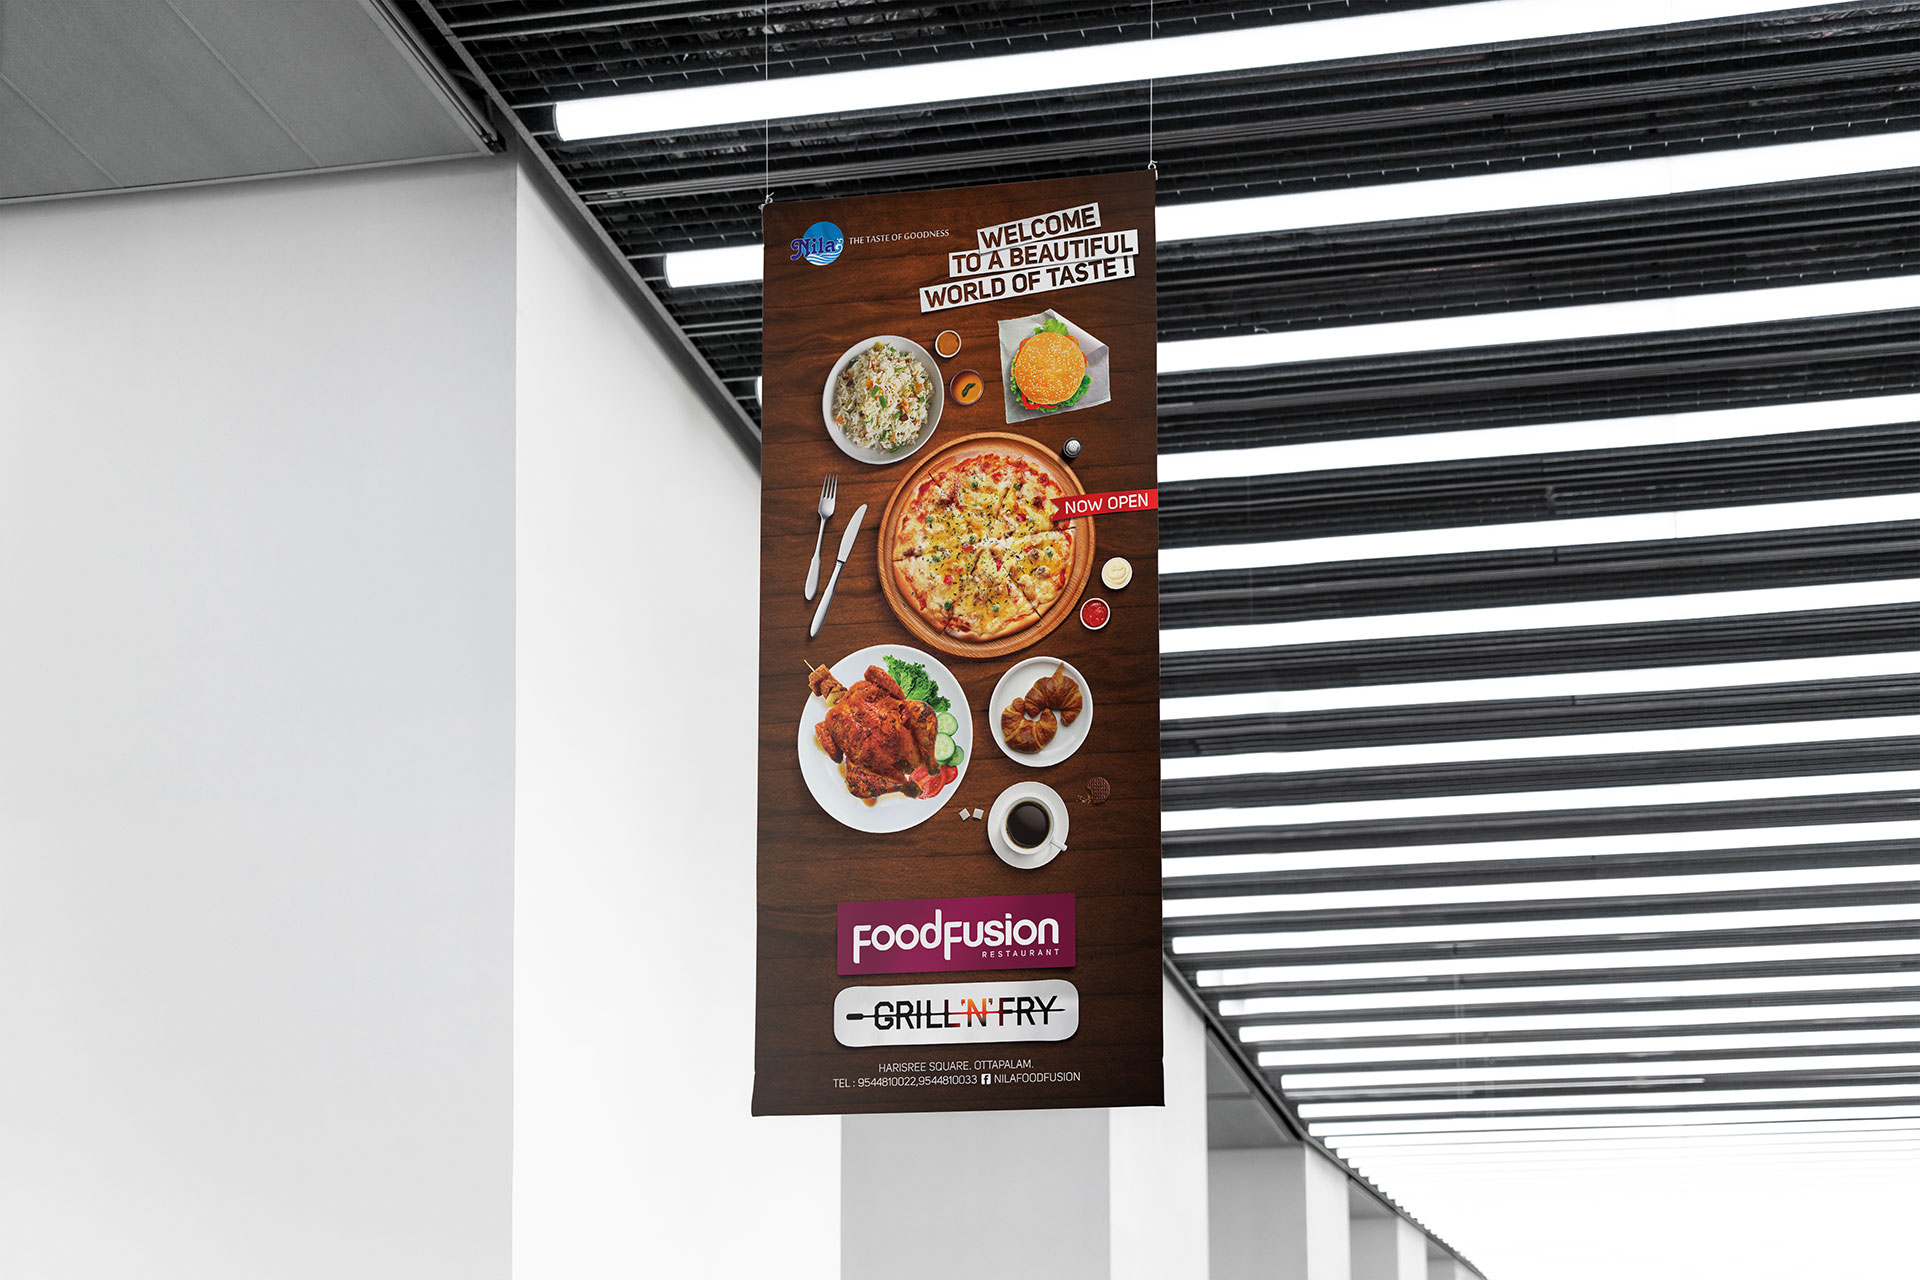 A hanging board of Nila Food Fusion and Grill 'N' Fry Restaurants